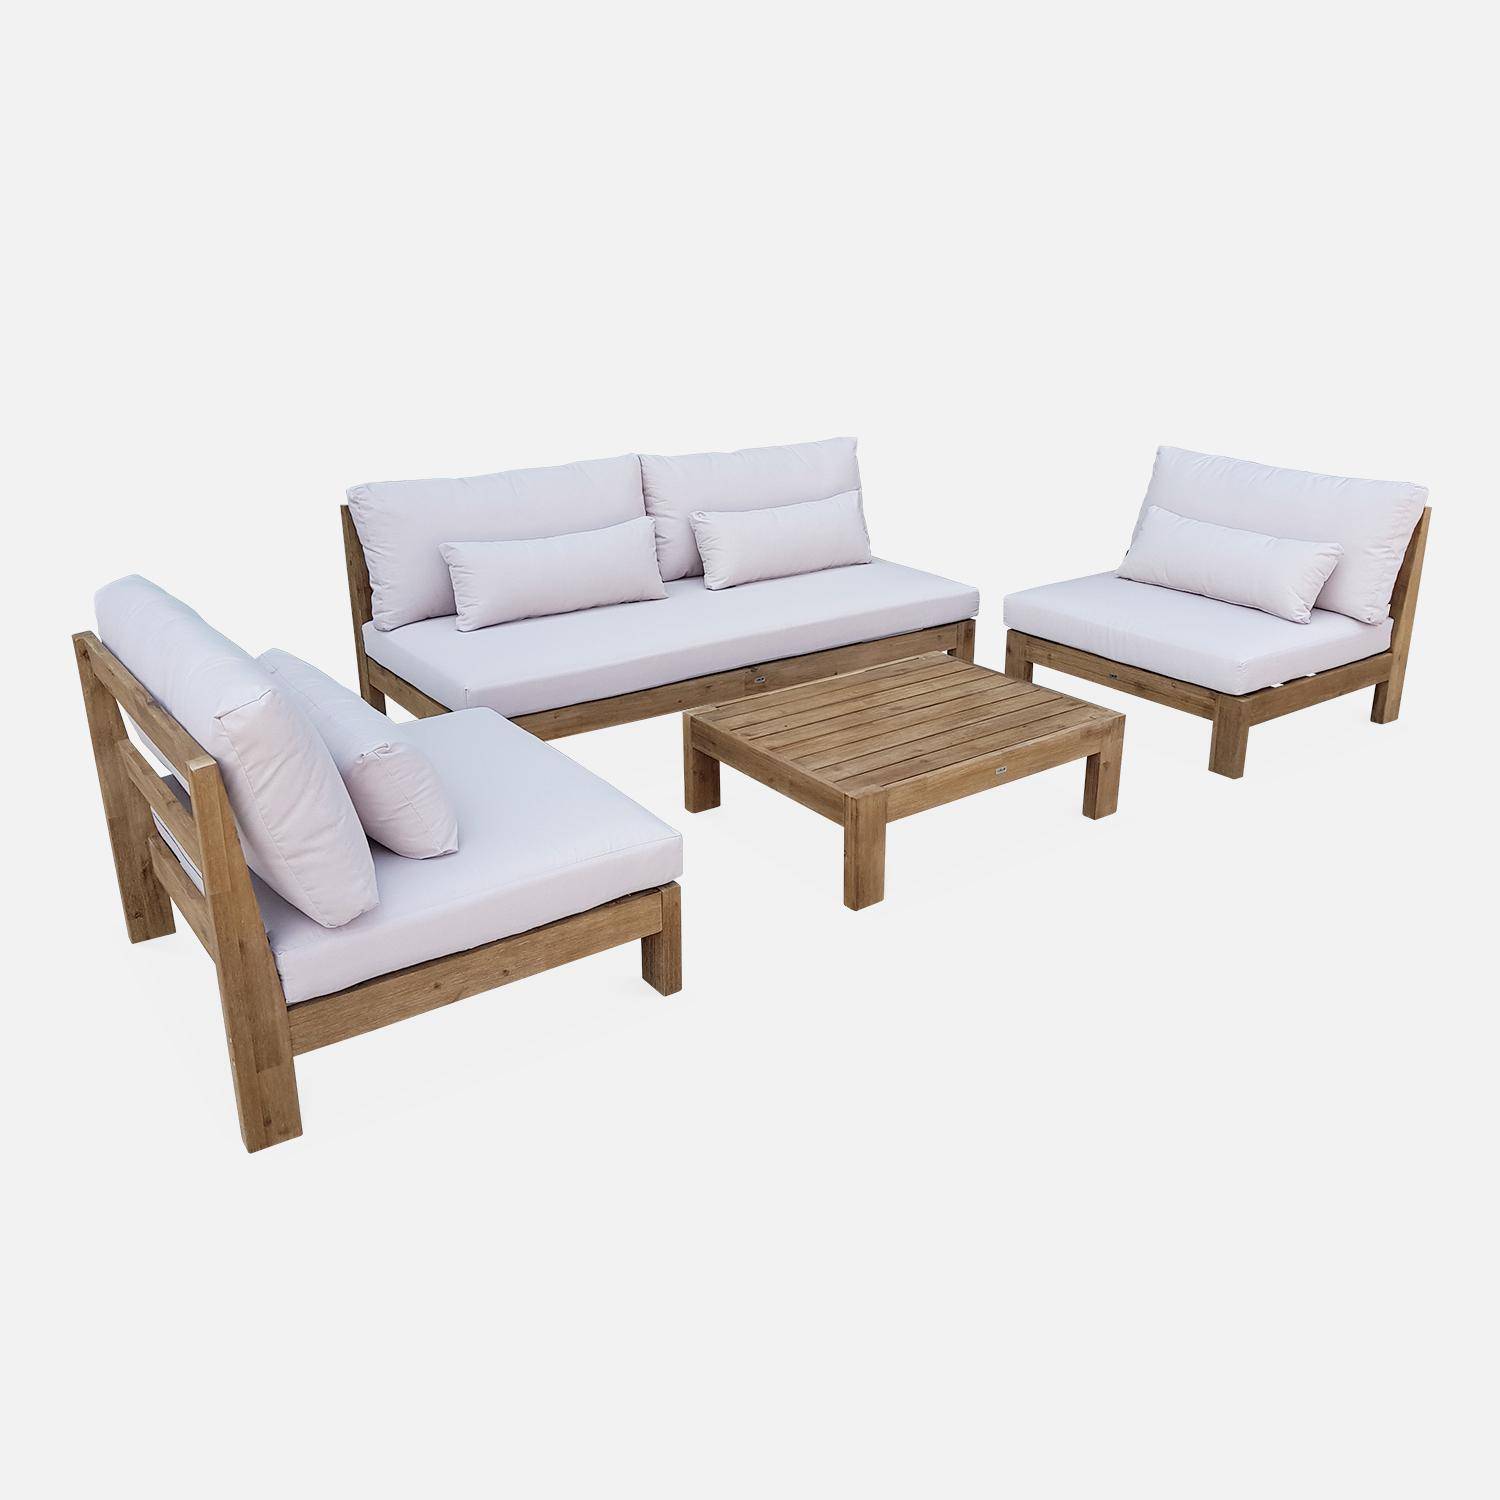 5-seater XXL wooden garden sofa set with brushed and bleached wood finish – Bahia – Beige Photo4